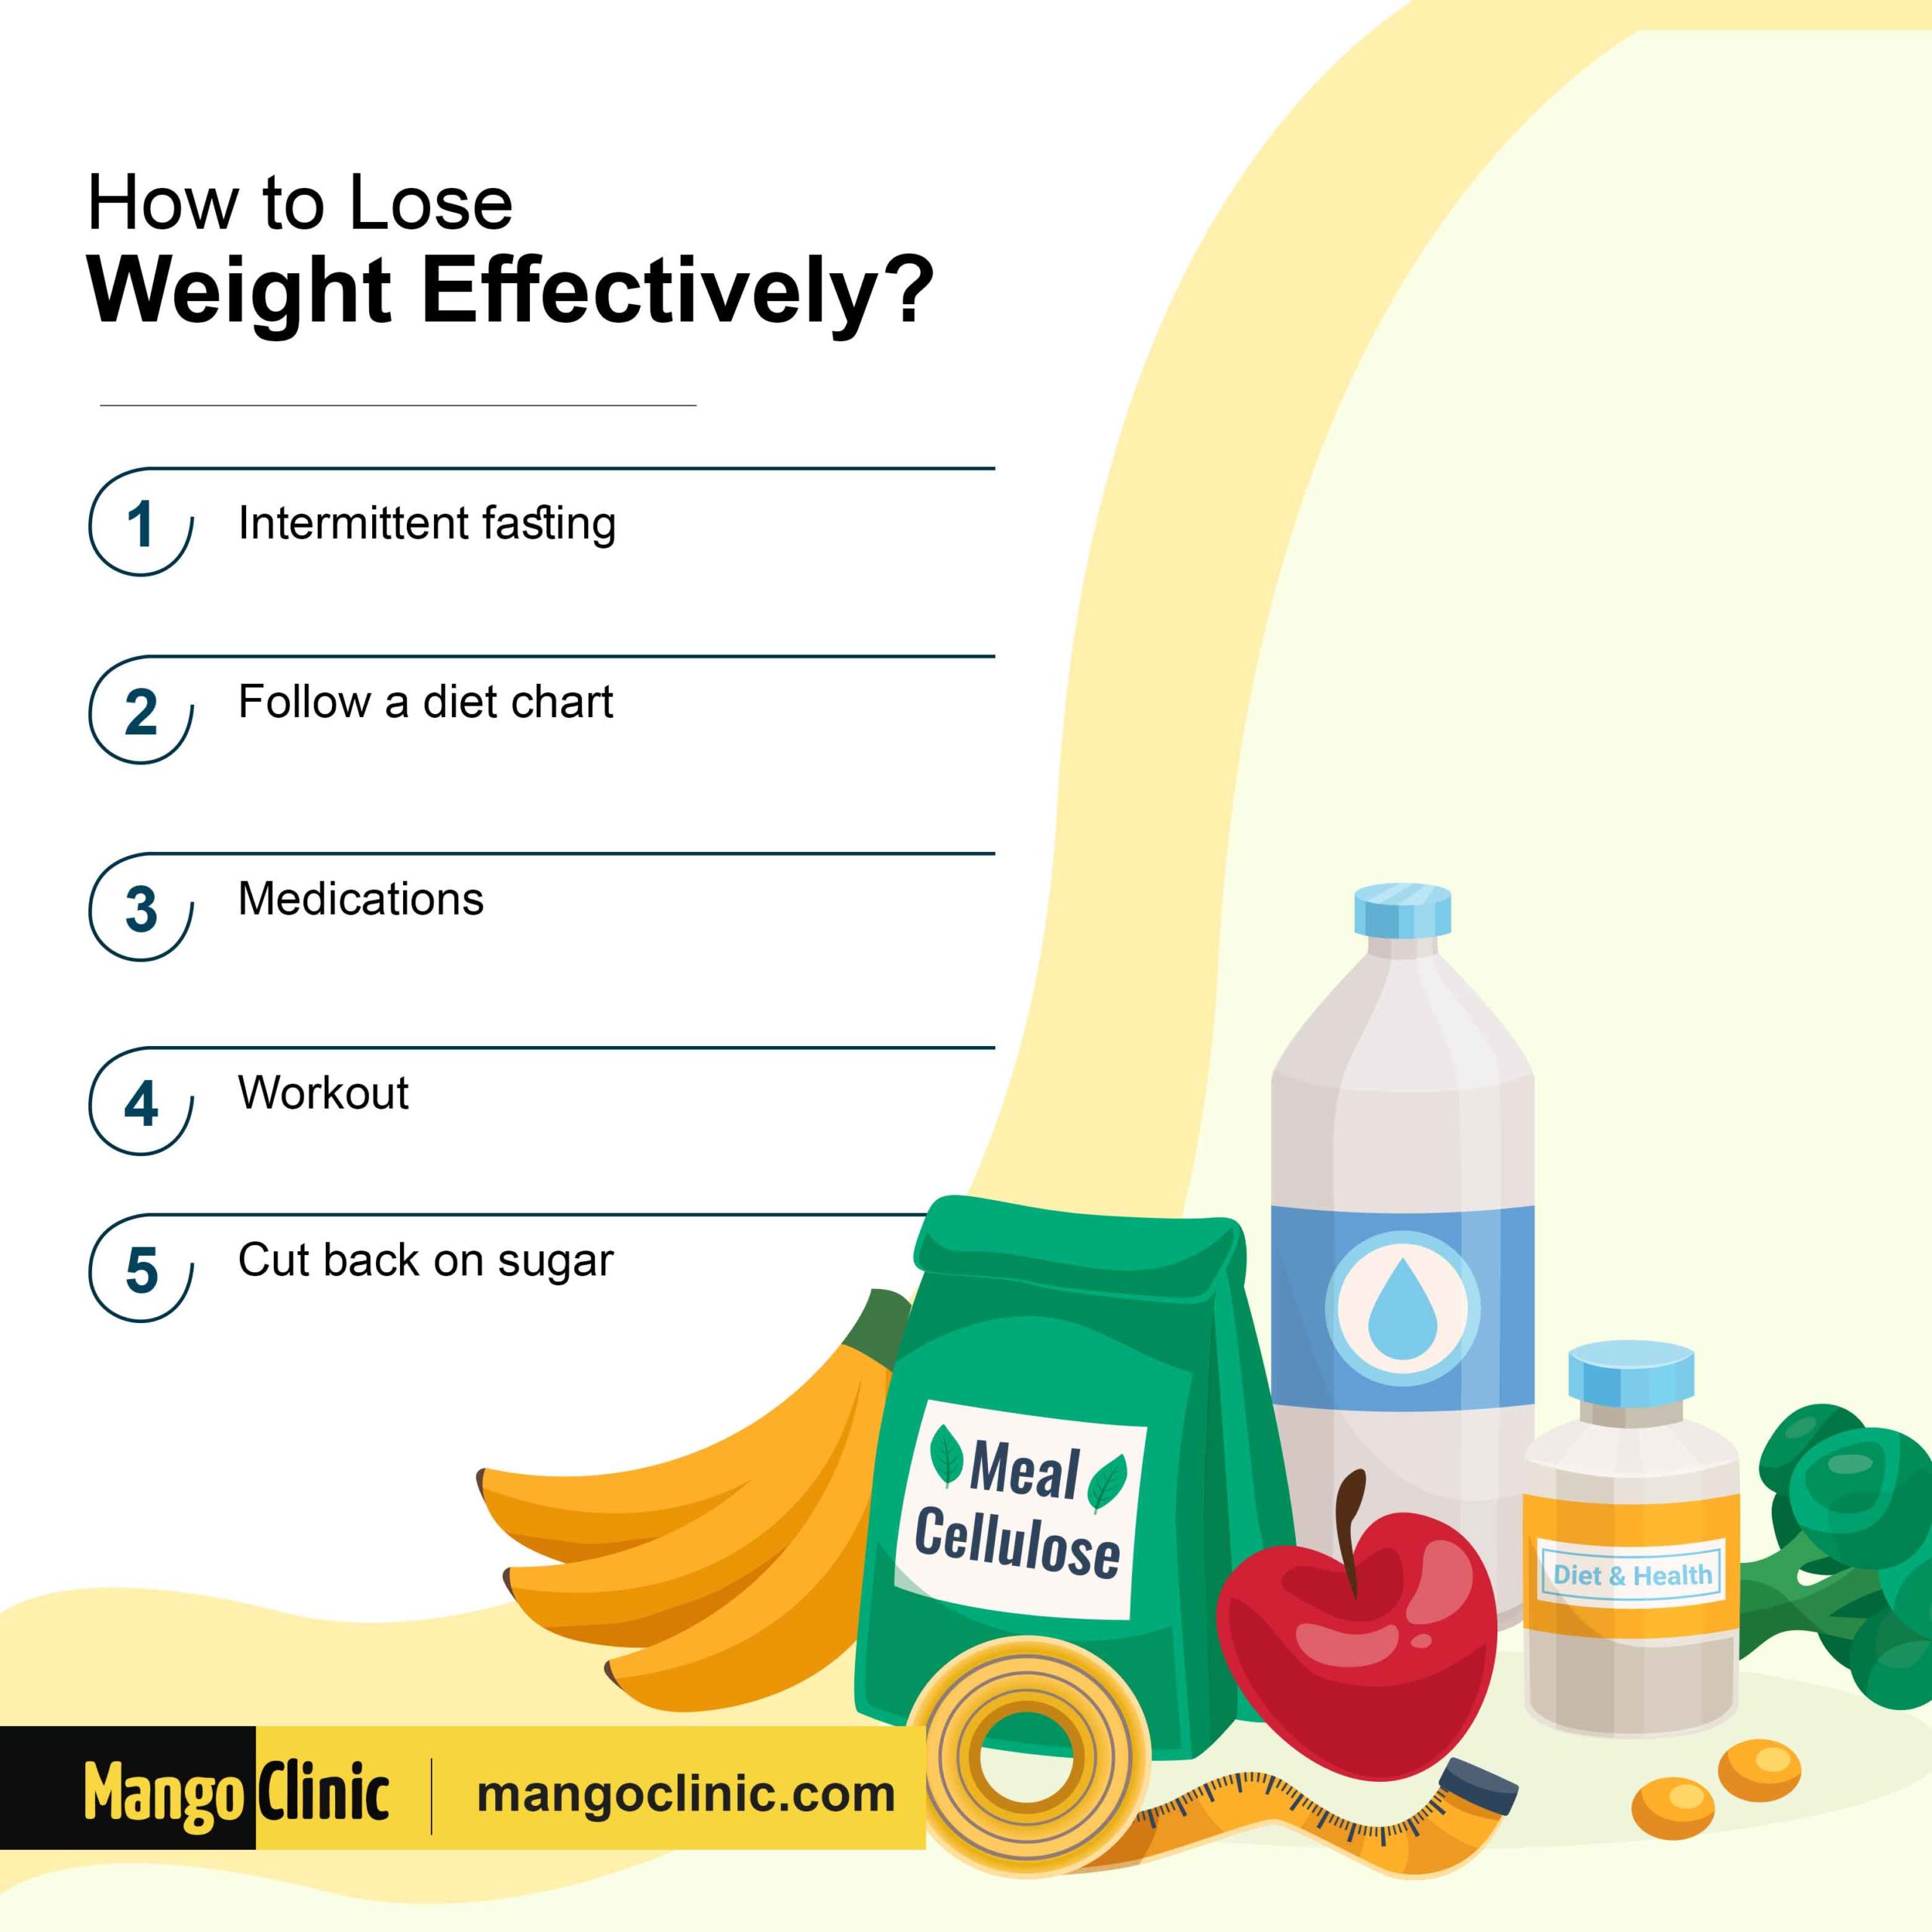 How to lose weight effectively